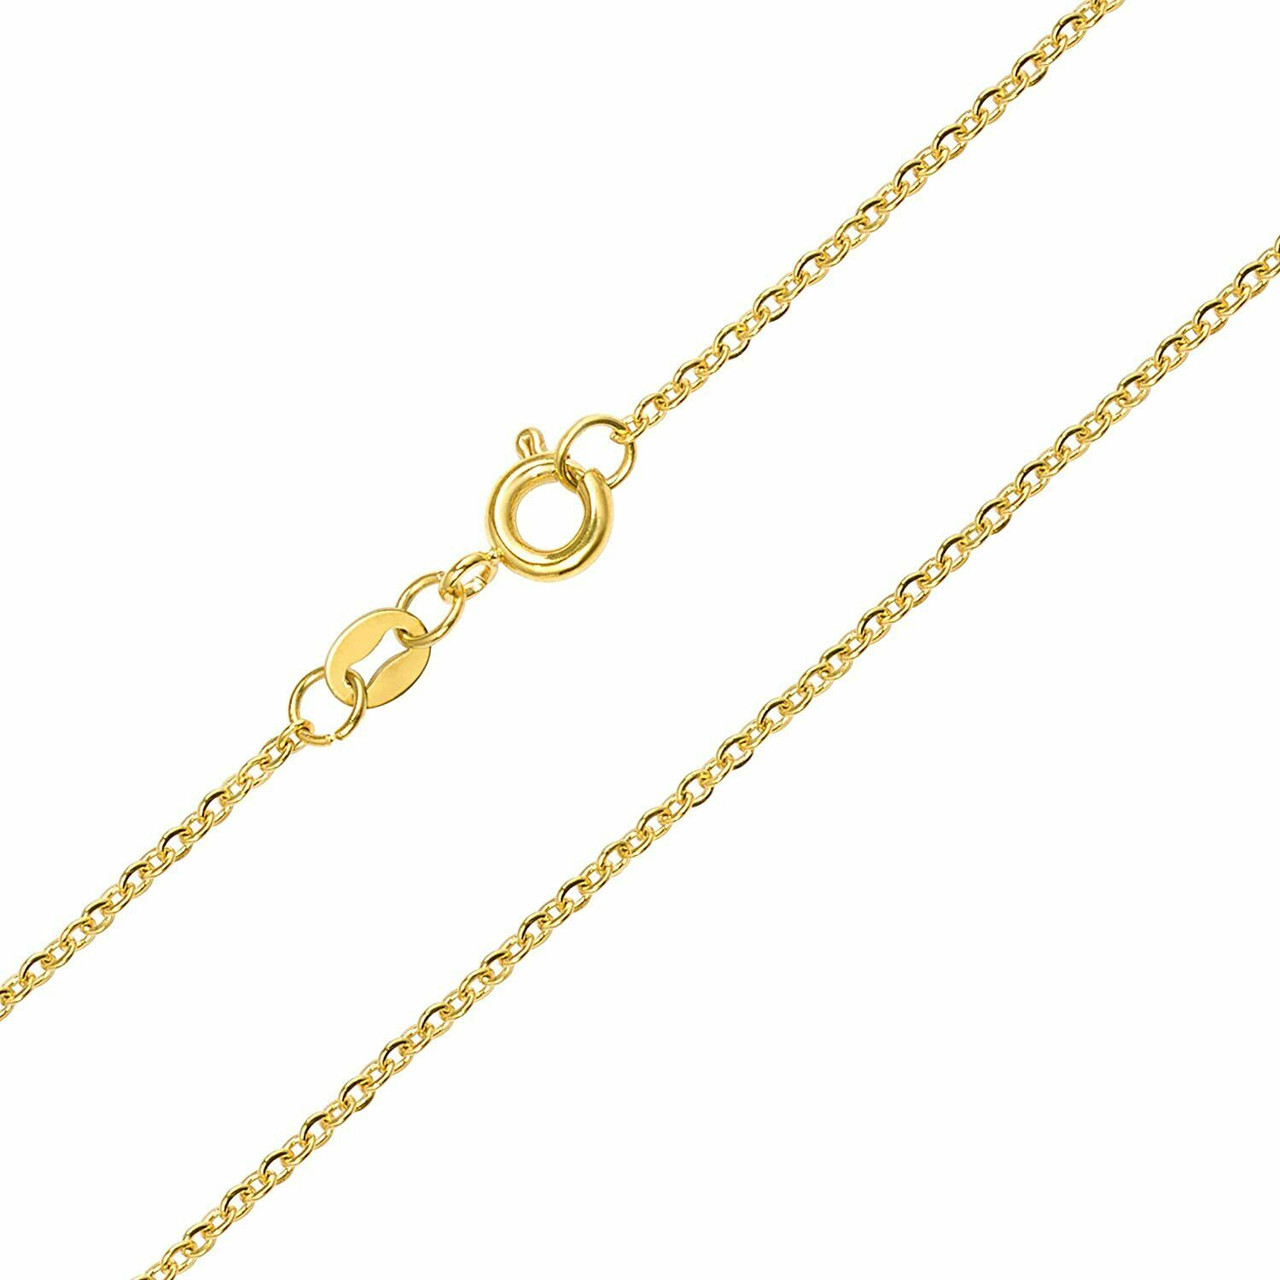 Wholesale 12 Pcs Genuine Stainless Steel Cable Chain Necklace Chains Bulk for Jewelry Making(18 Inch(1.5mm))